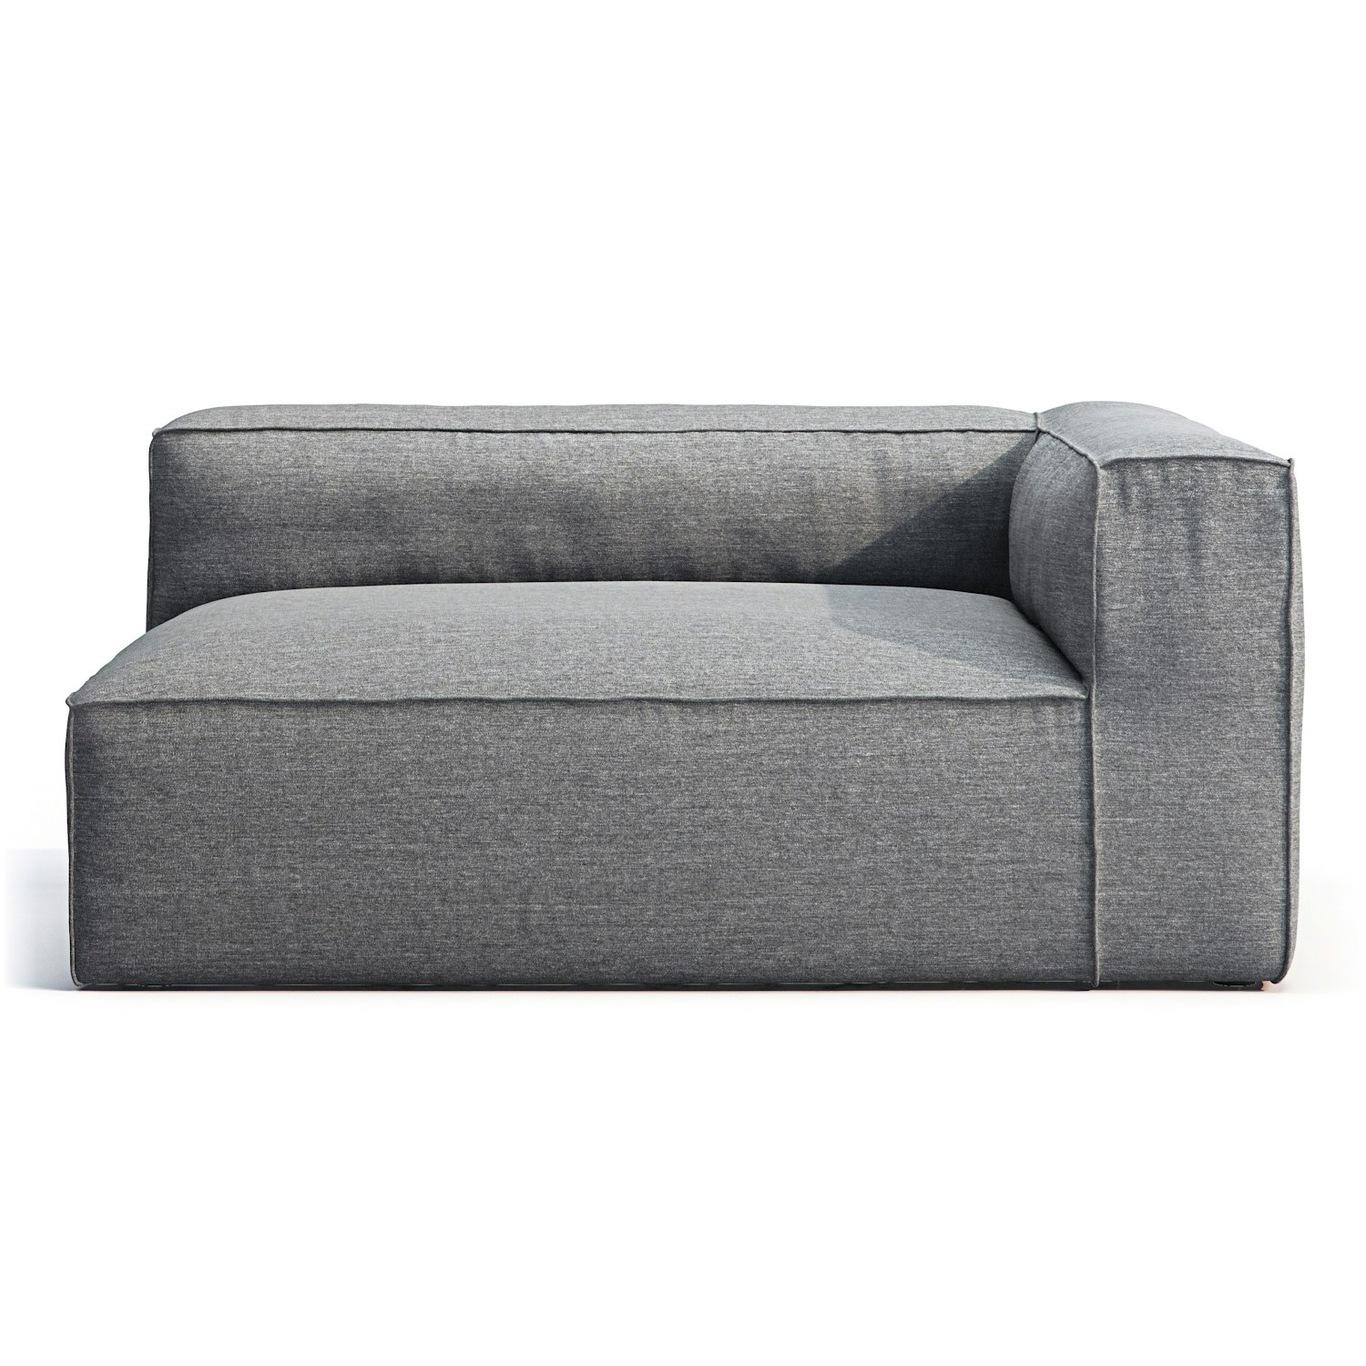 Grand Outdoor Modular Sofa Right, Charcoal Chiné